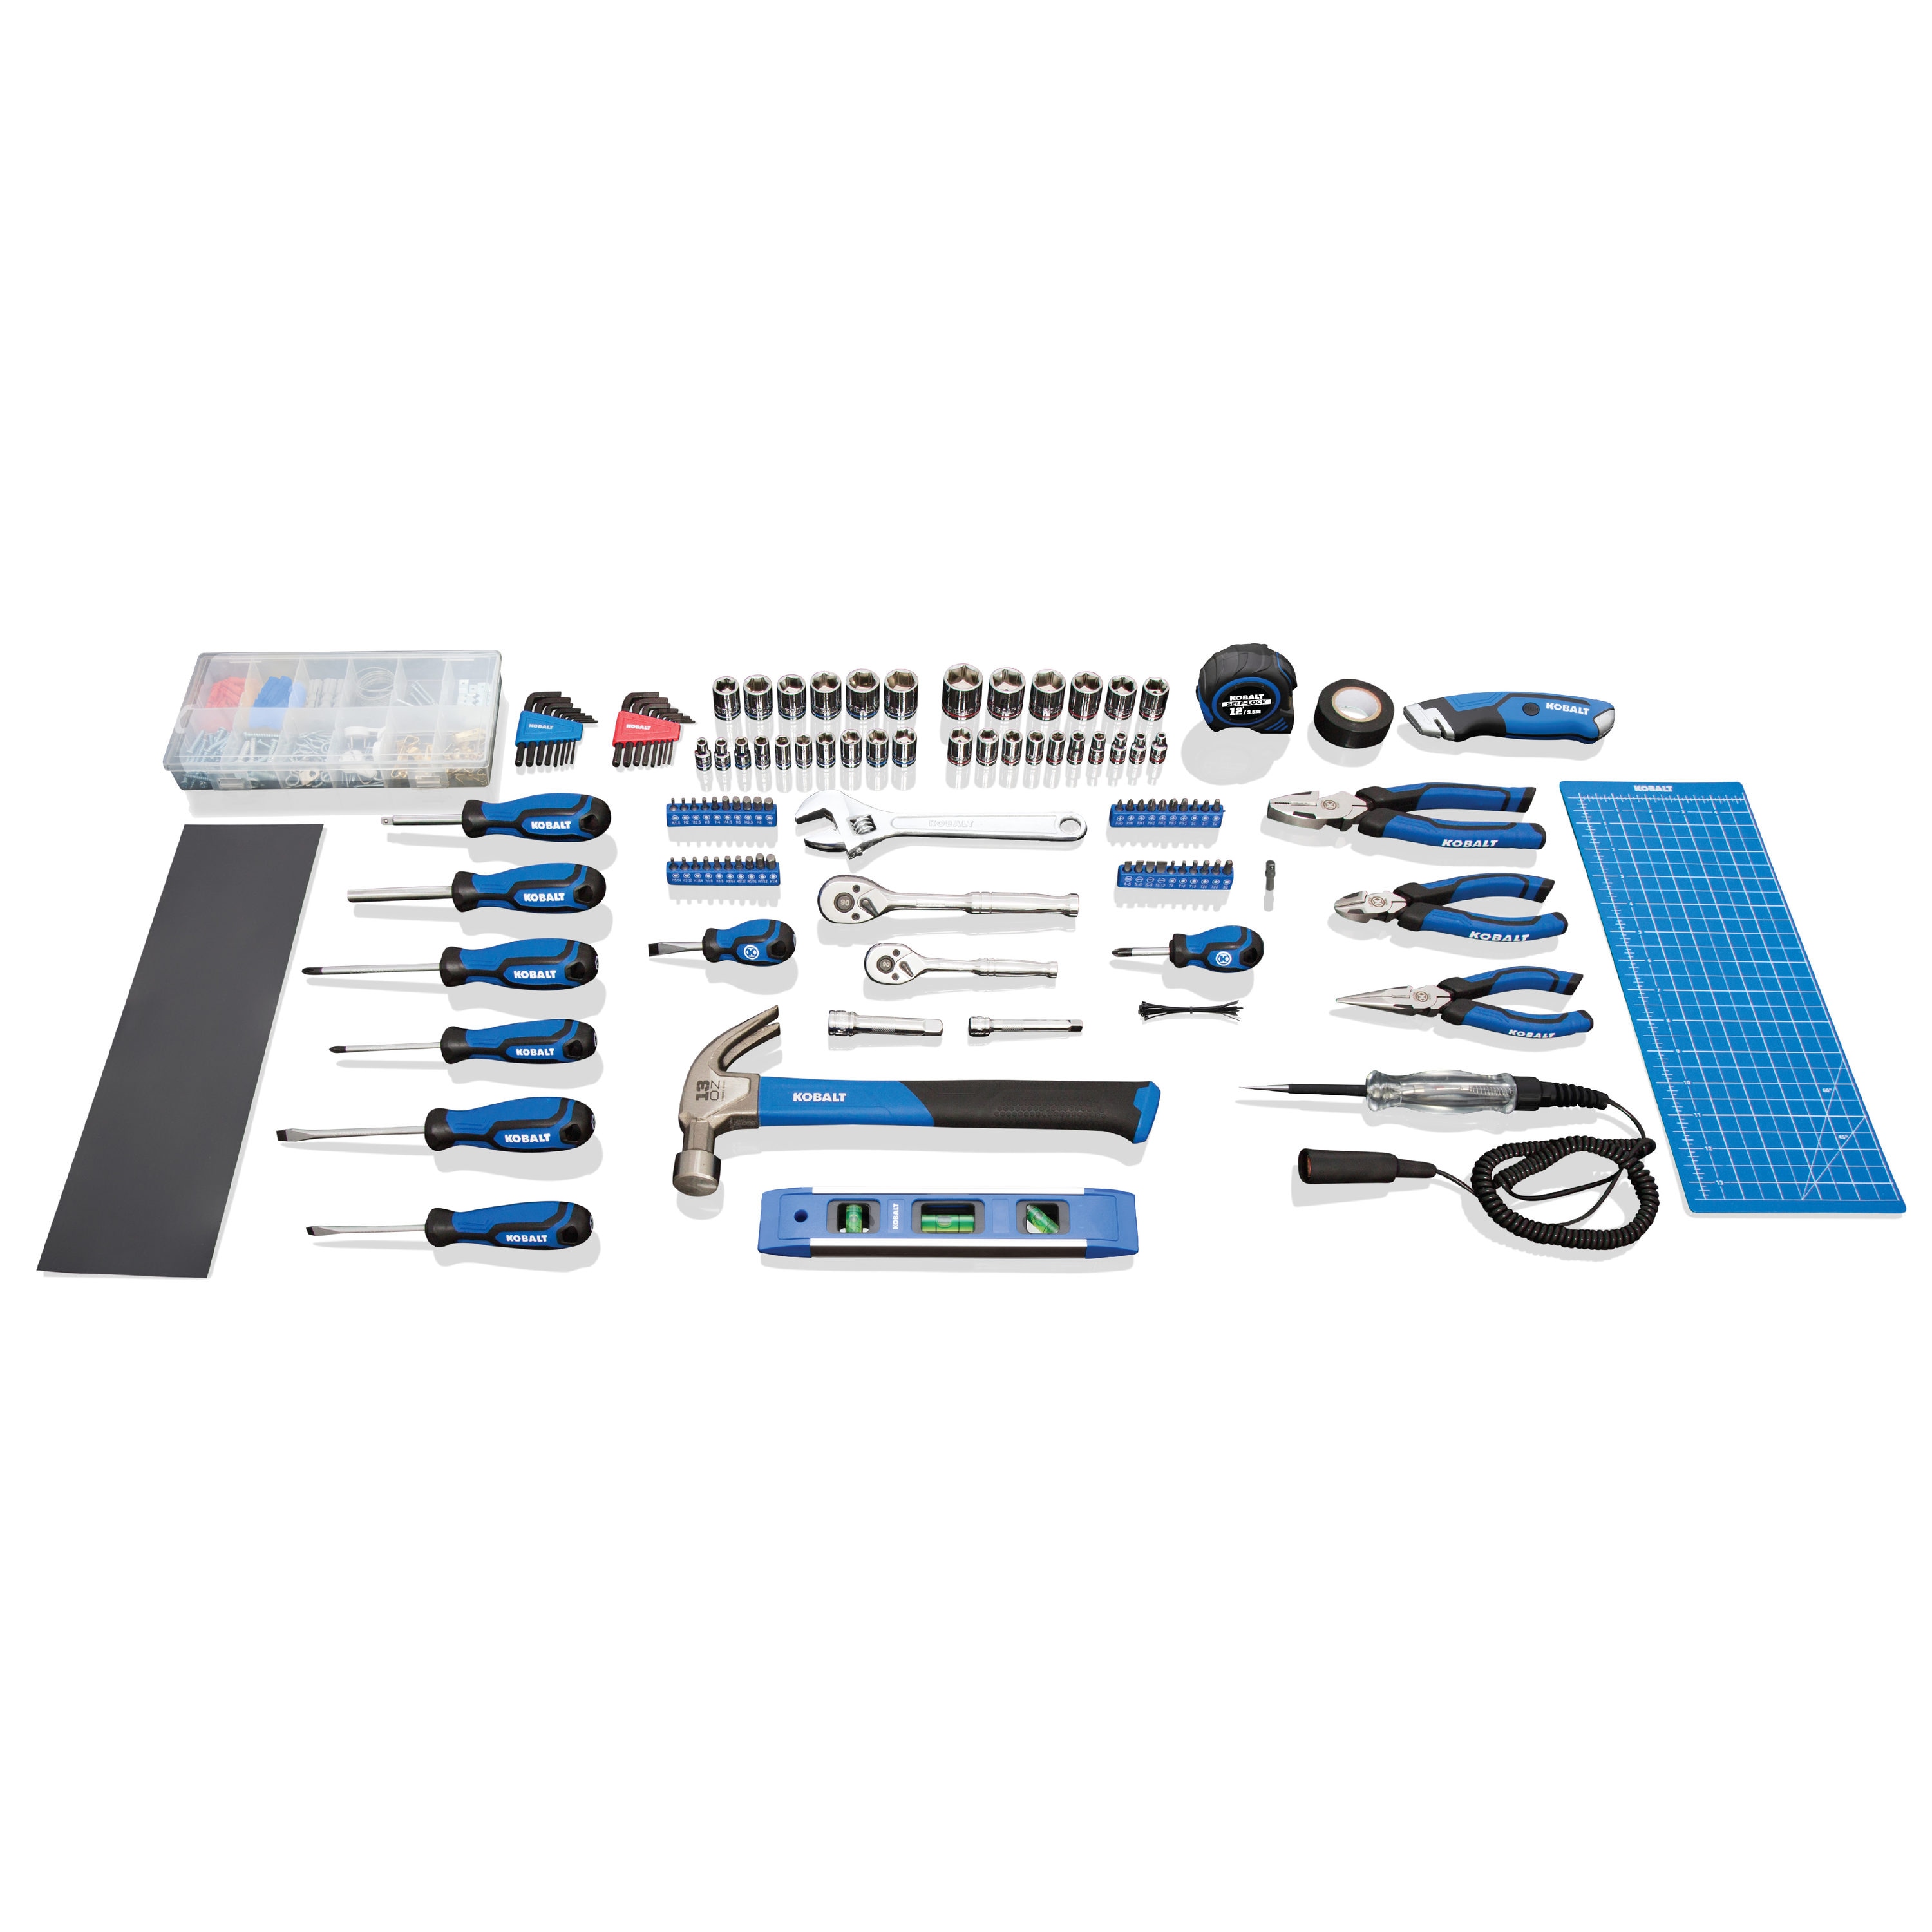 Black+Decker Hand Tool and Accessory Home Project Kit, 63 pc